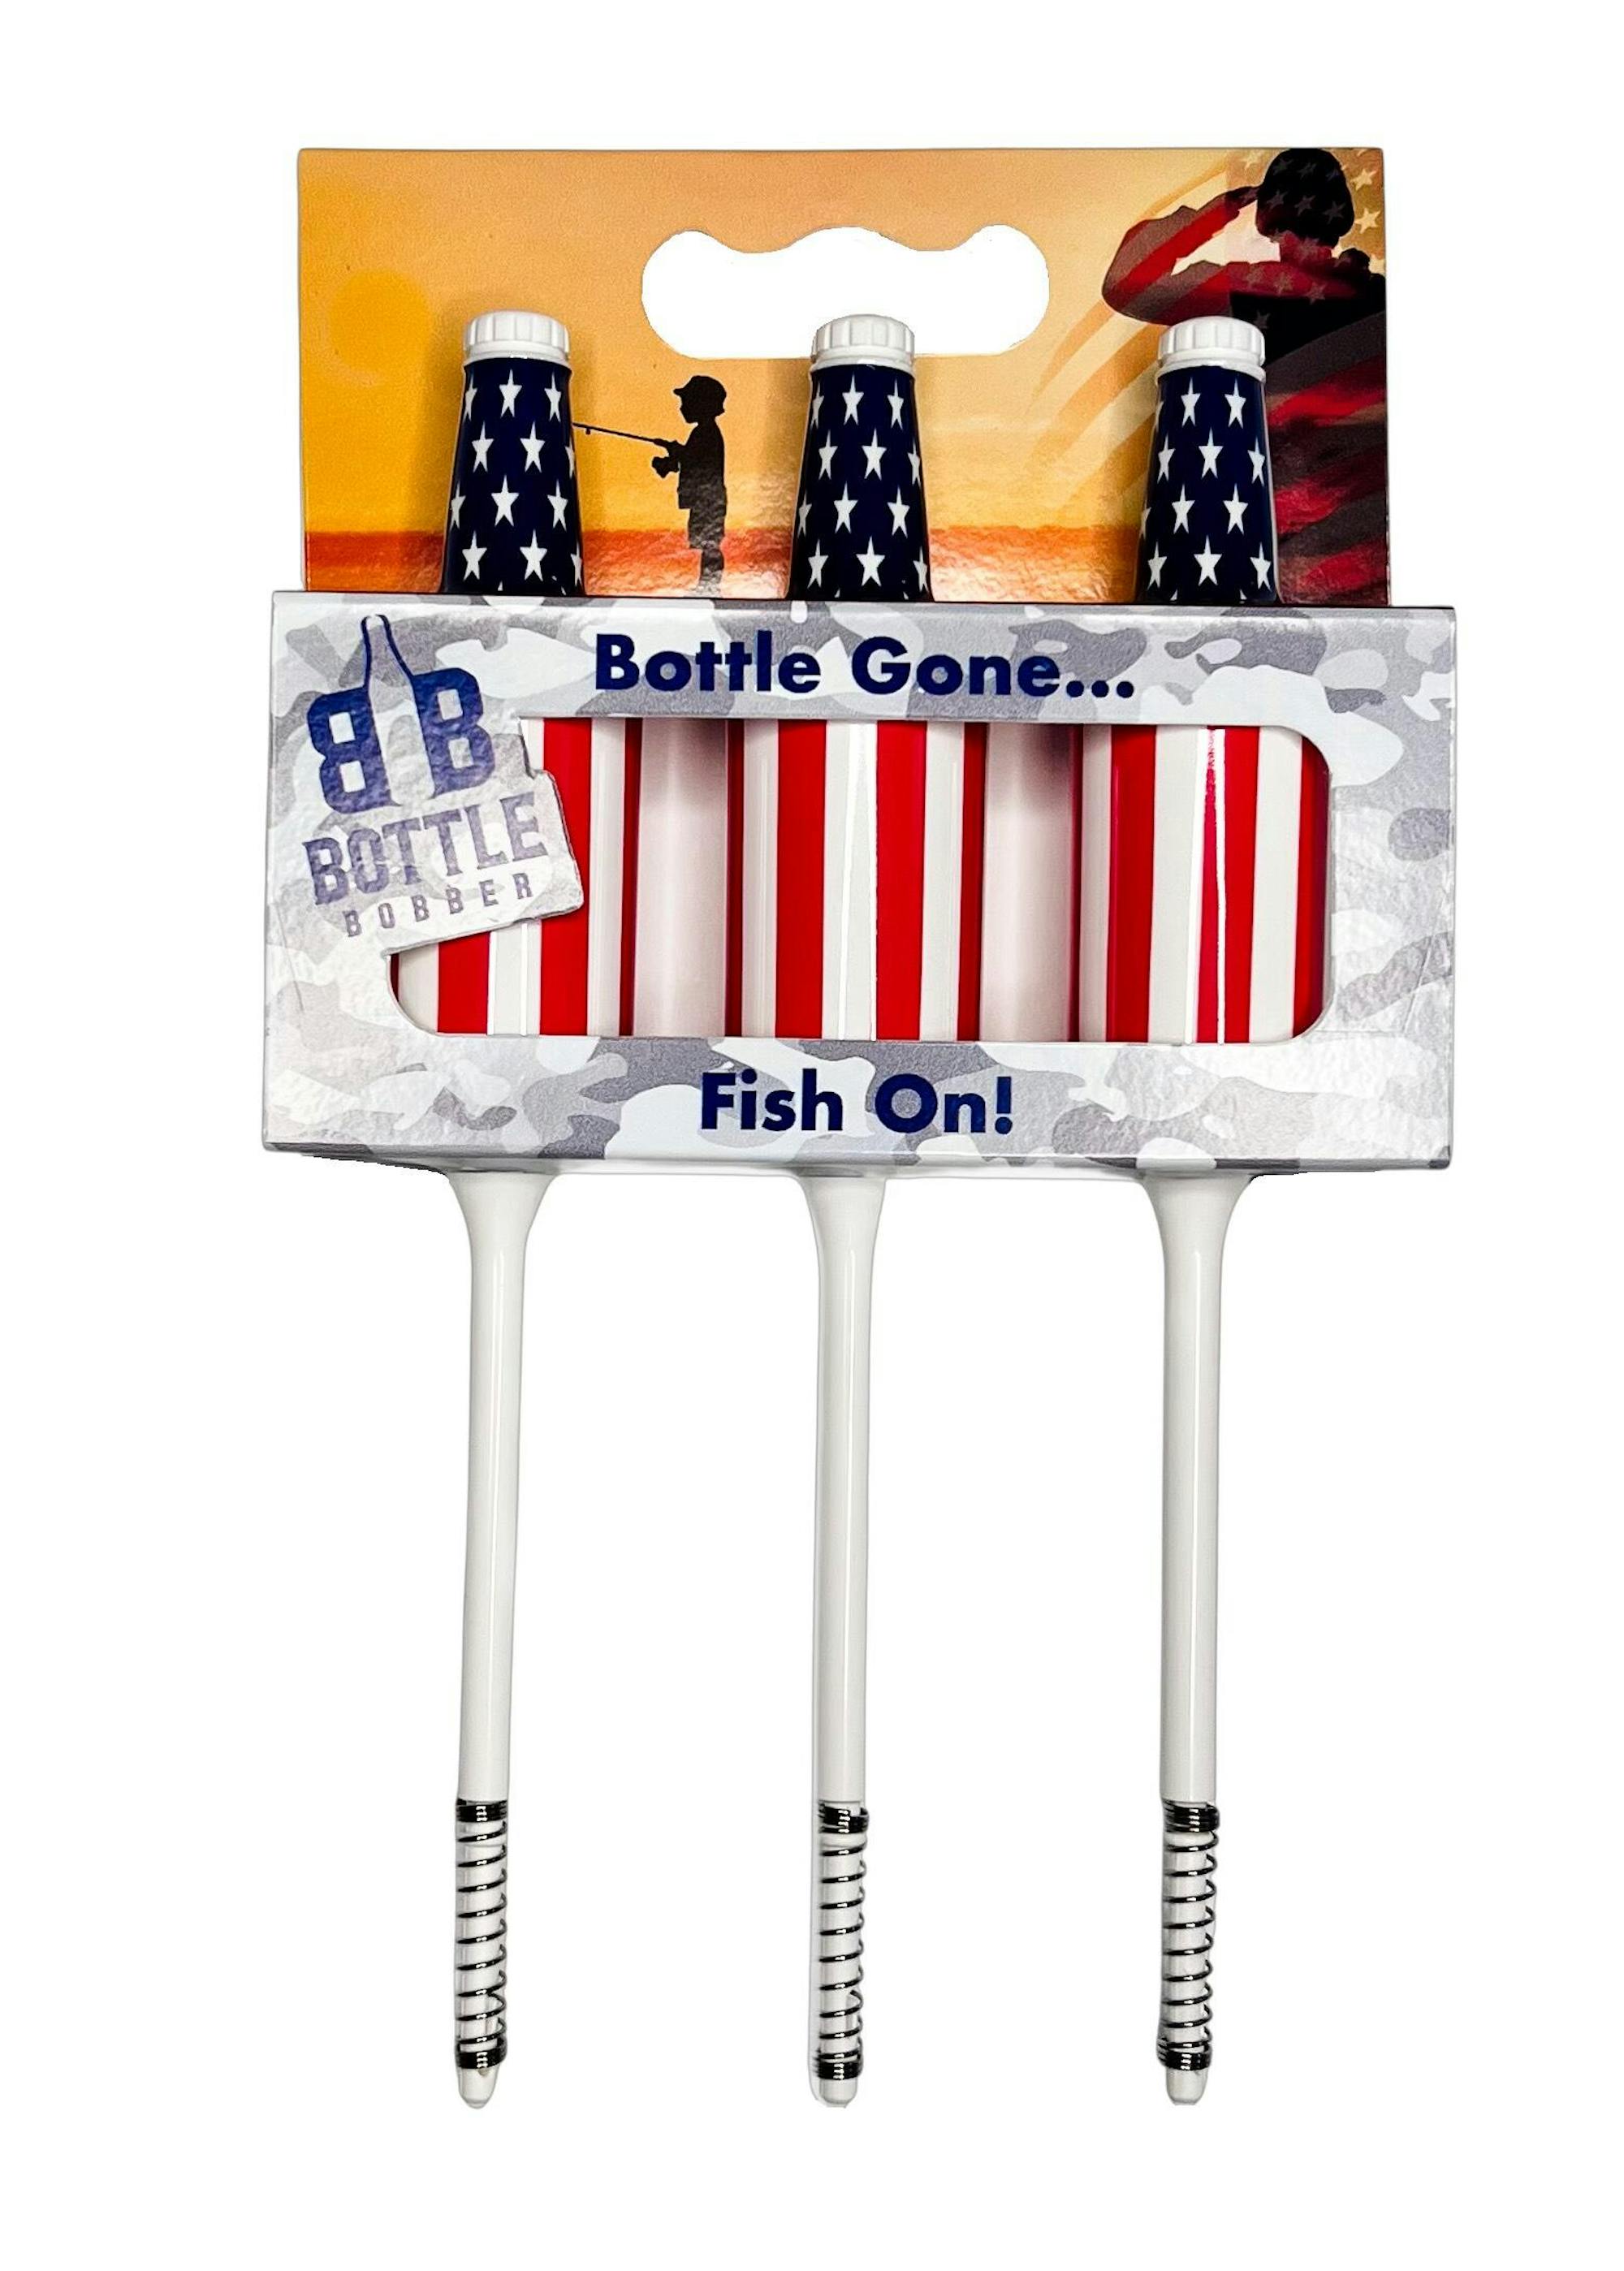 Southern Bell Brands, Busch Light Fishing Bobbers, Fishing Gifts for Men,  Gift for Boyfriend, Fathers Day, Fishing Gifts, Fishing -  Canada